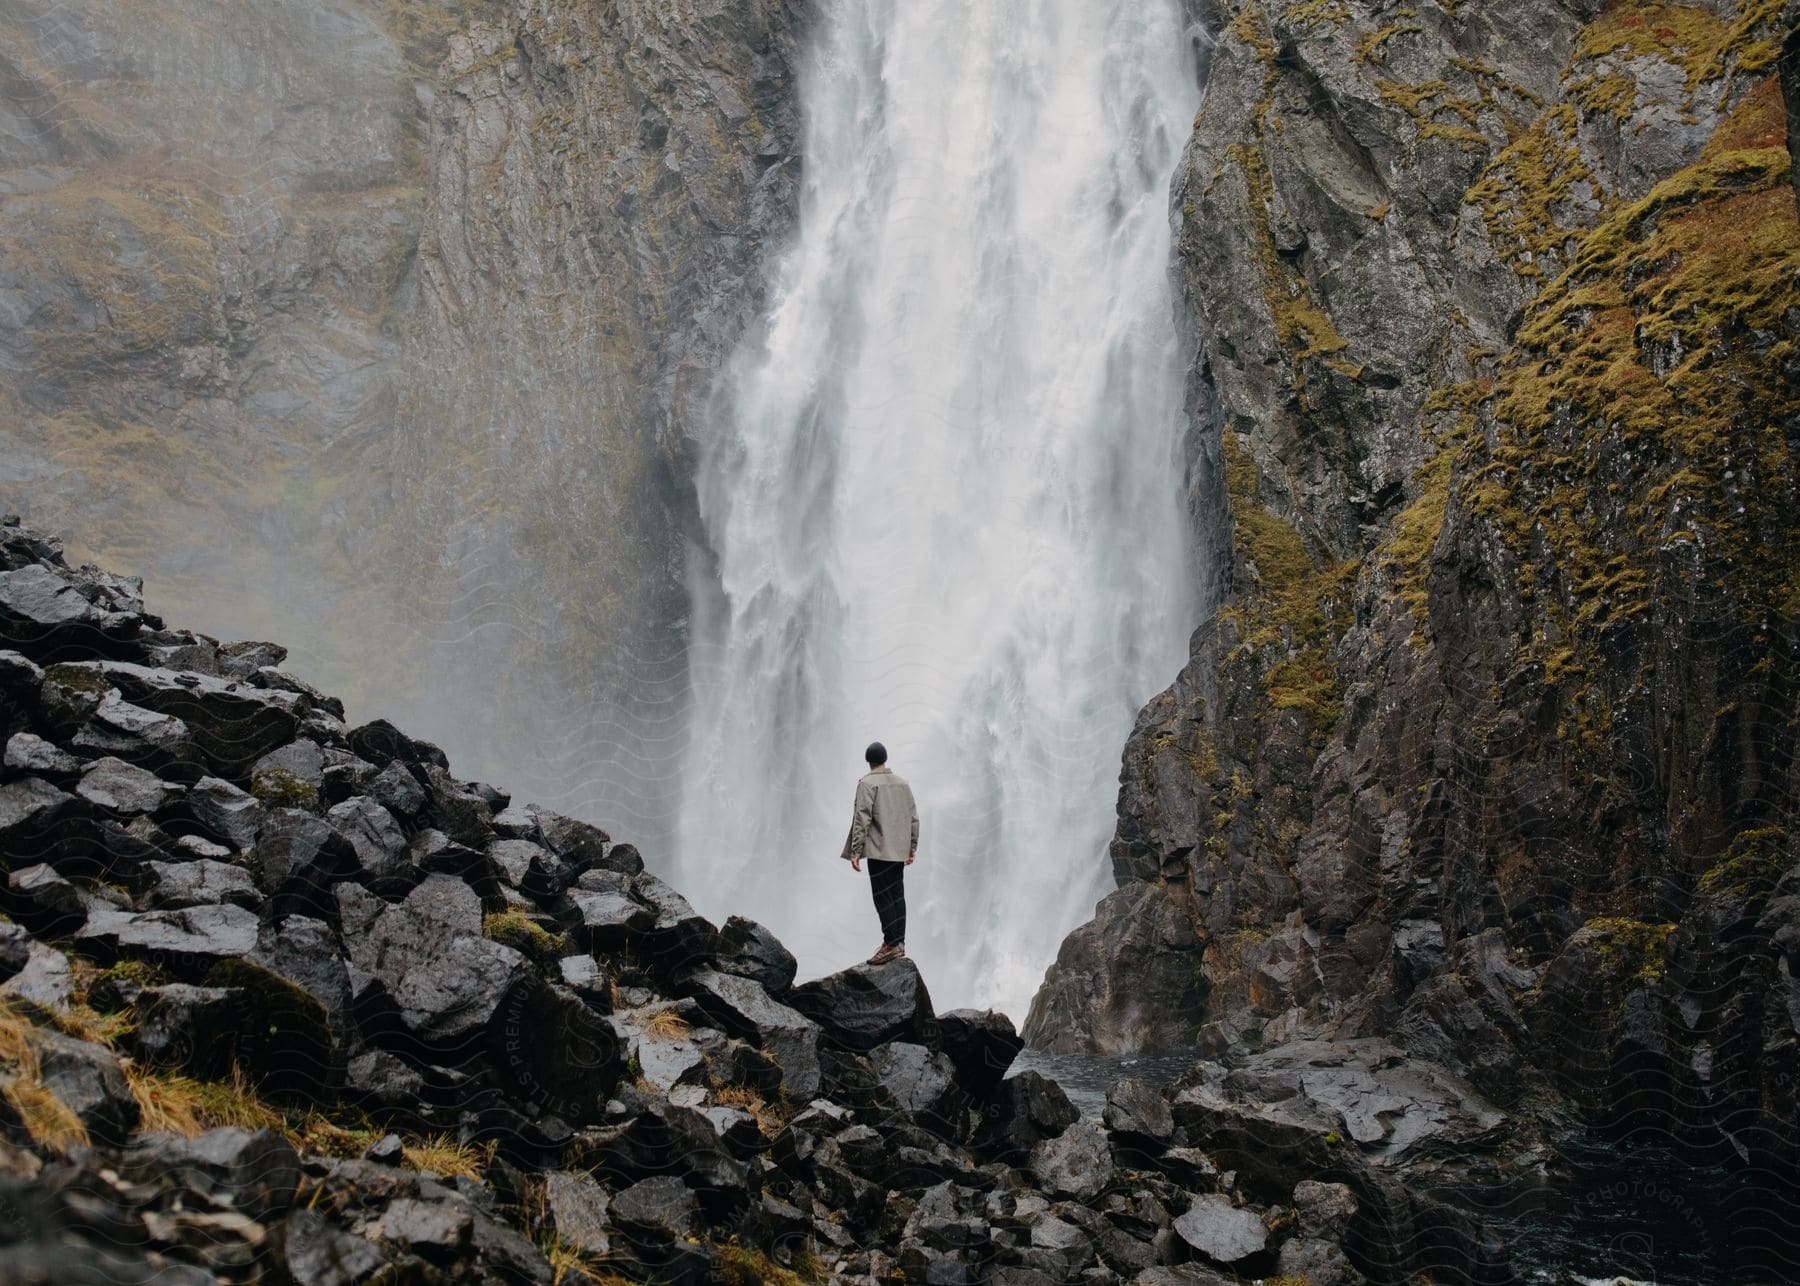 A man sitting on a rock near a waterfall in nature during the day